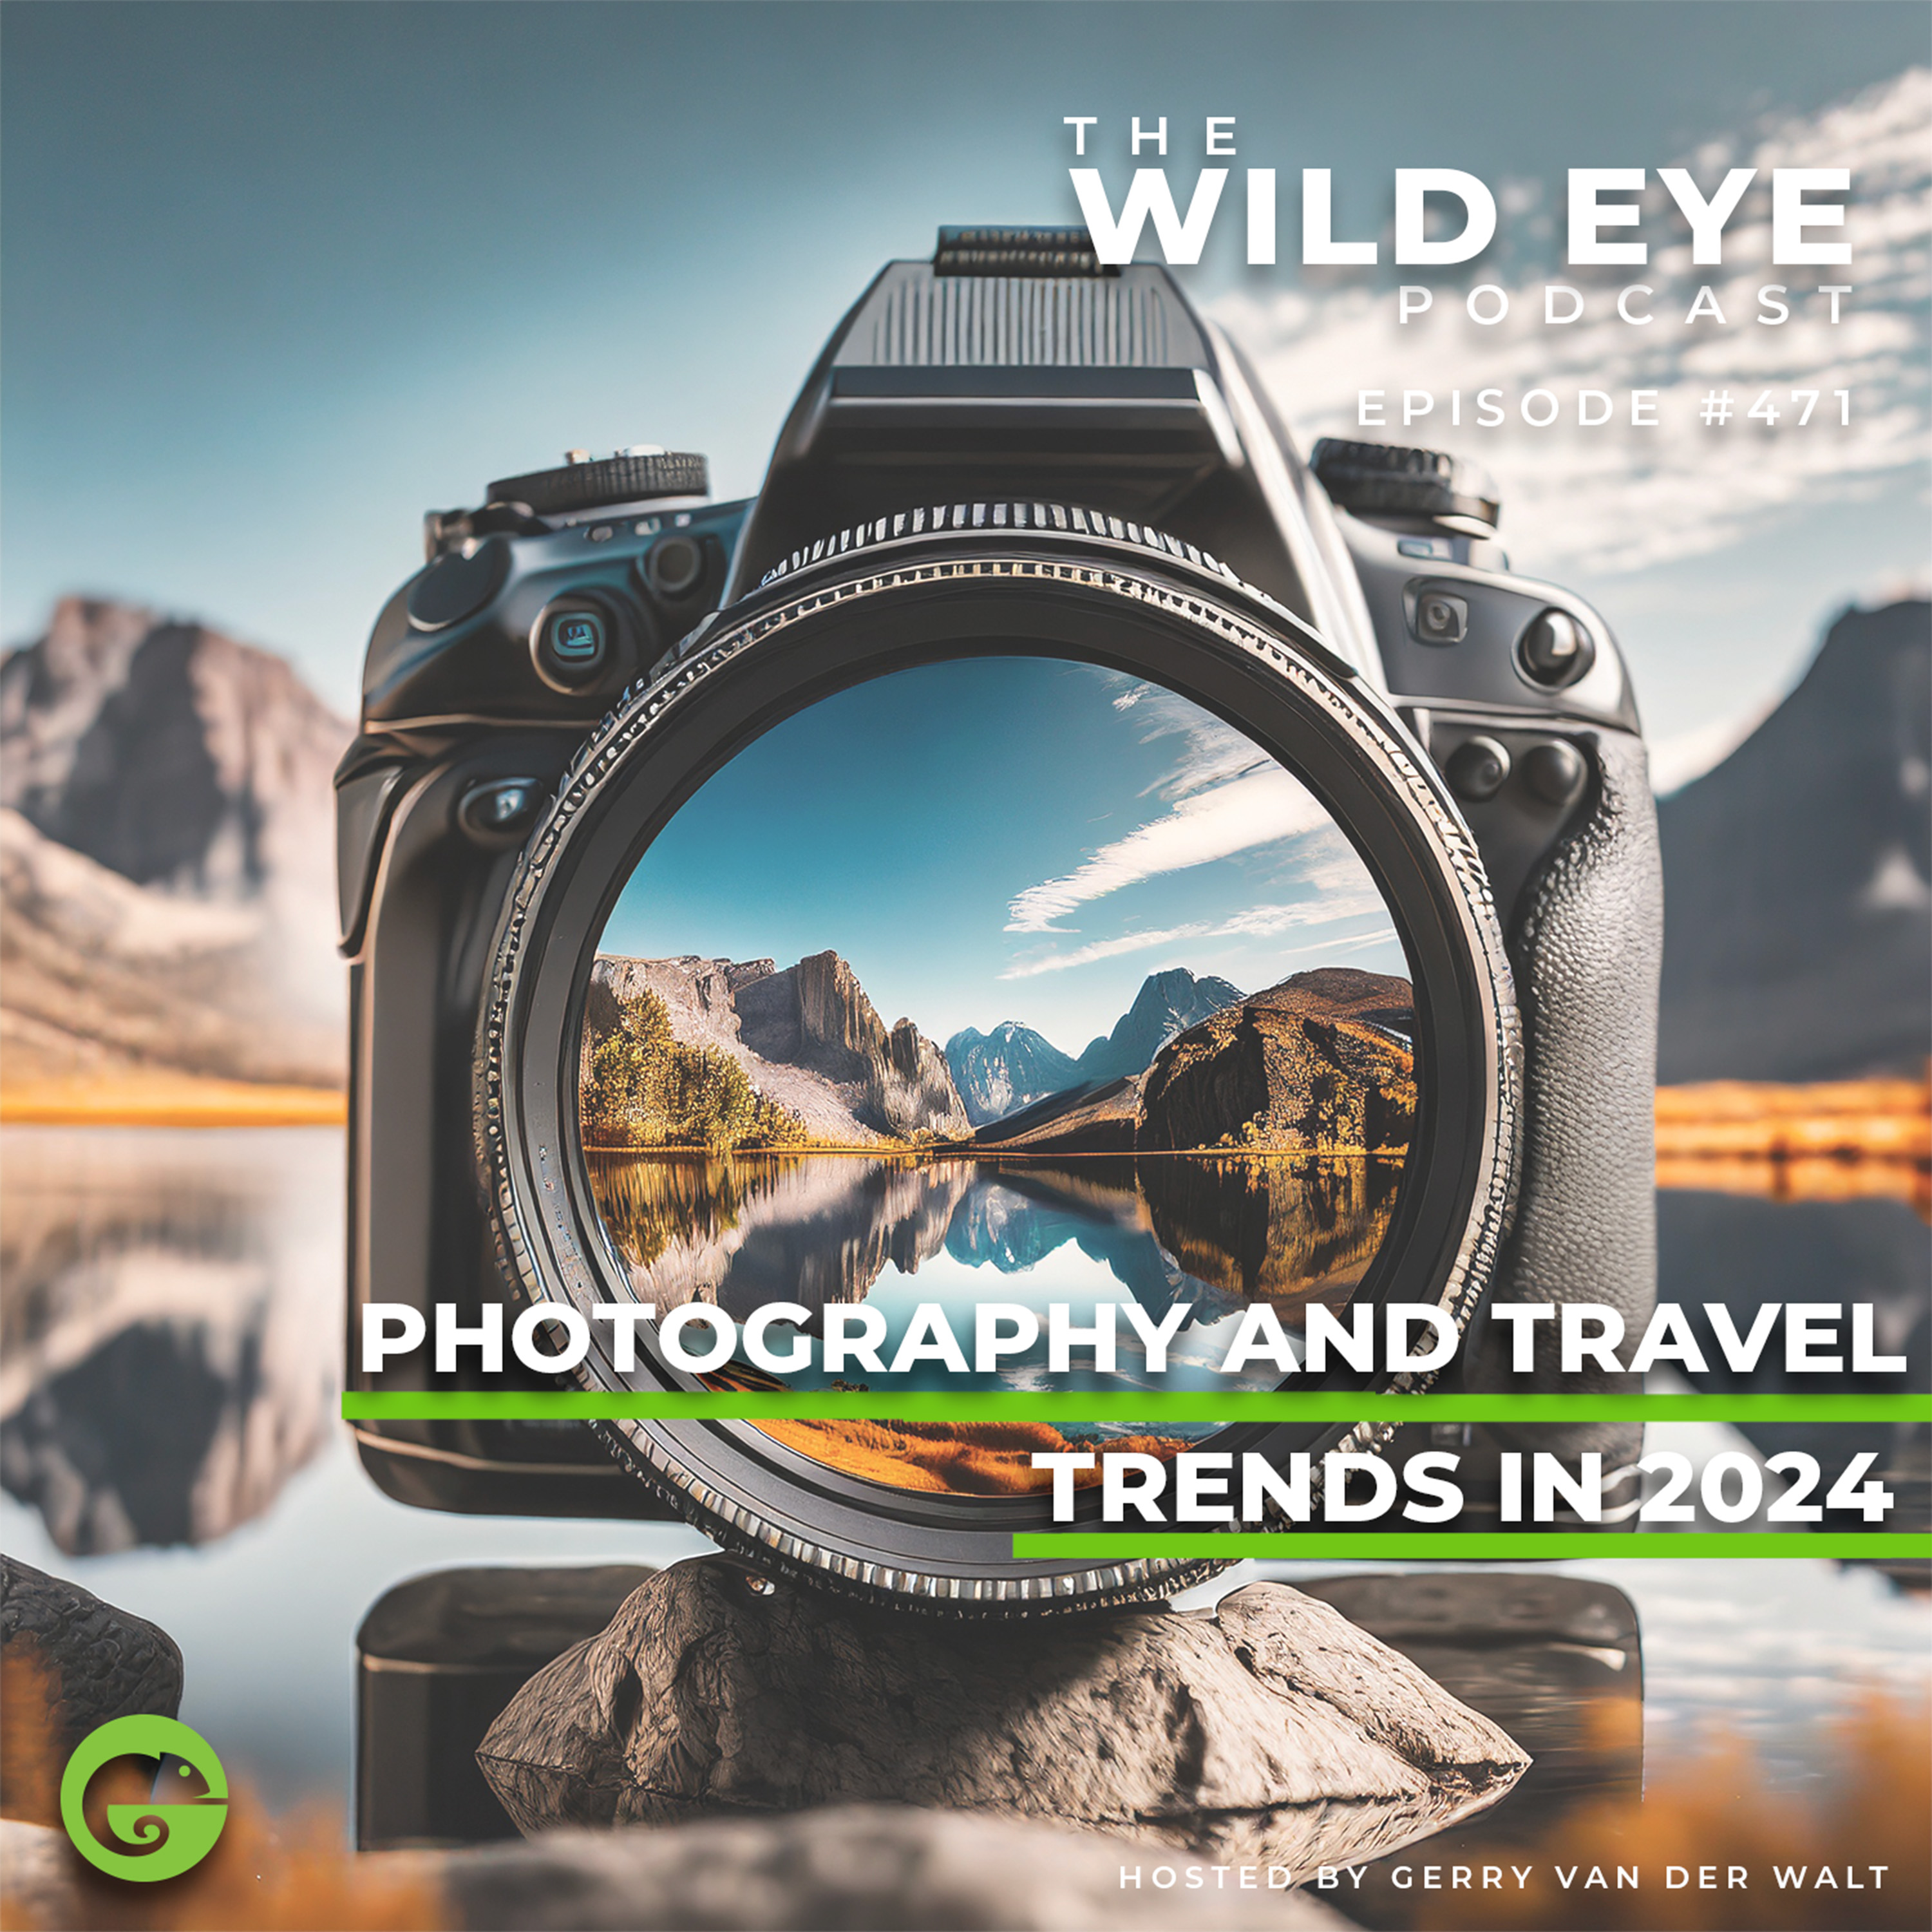 #471 - Photography and travel trends in 2024